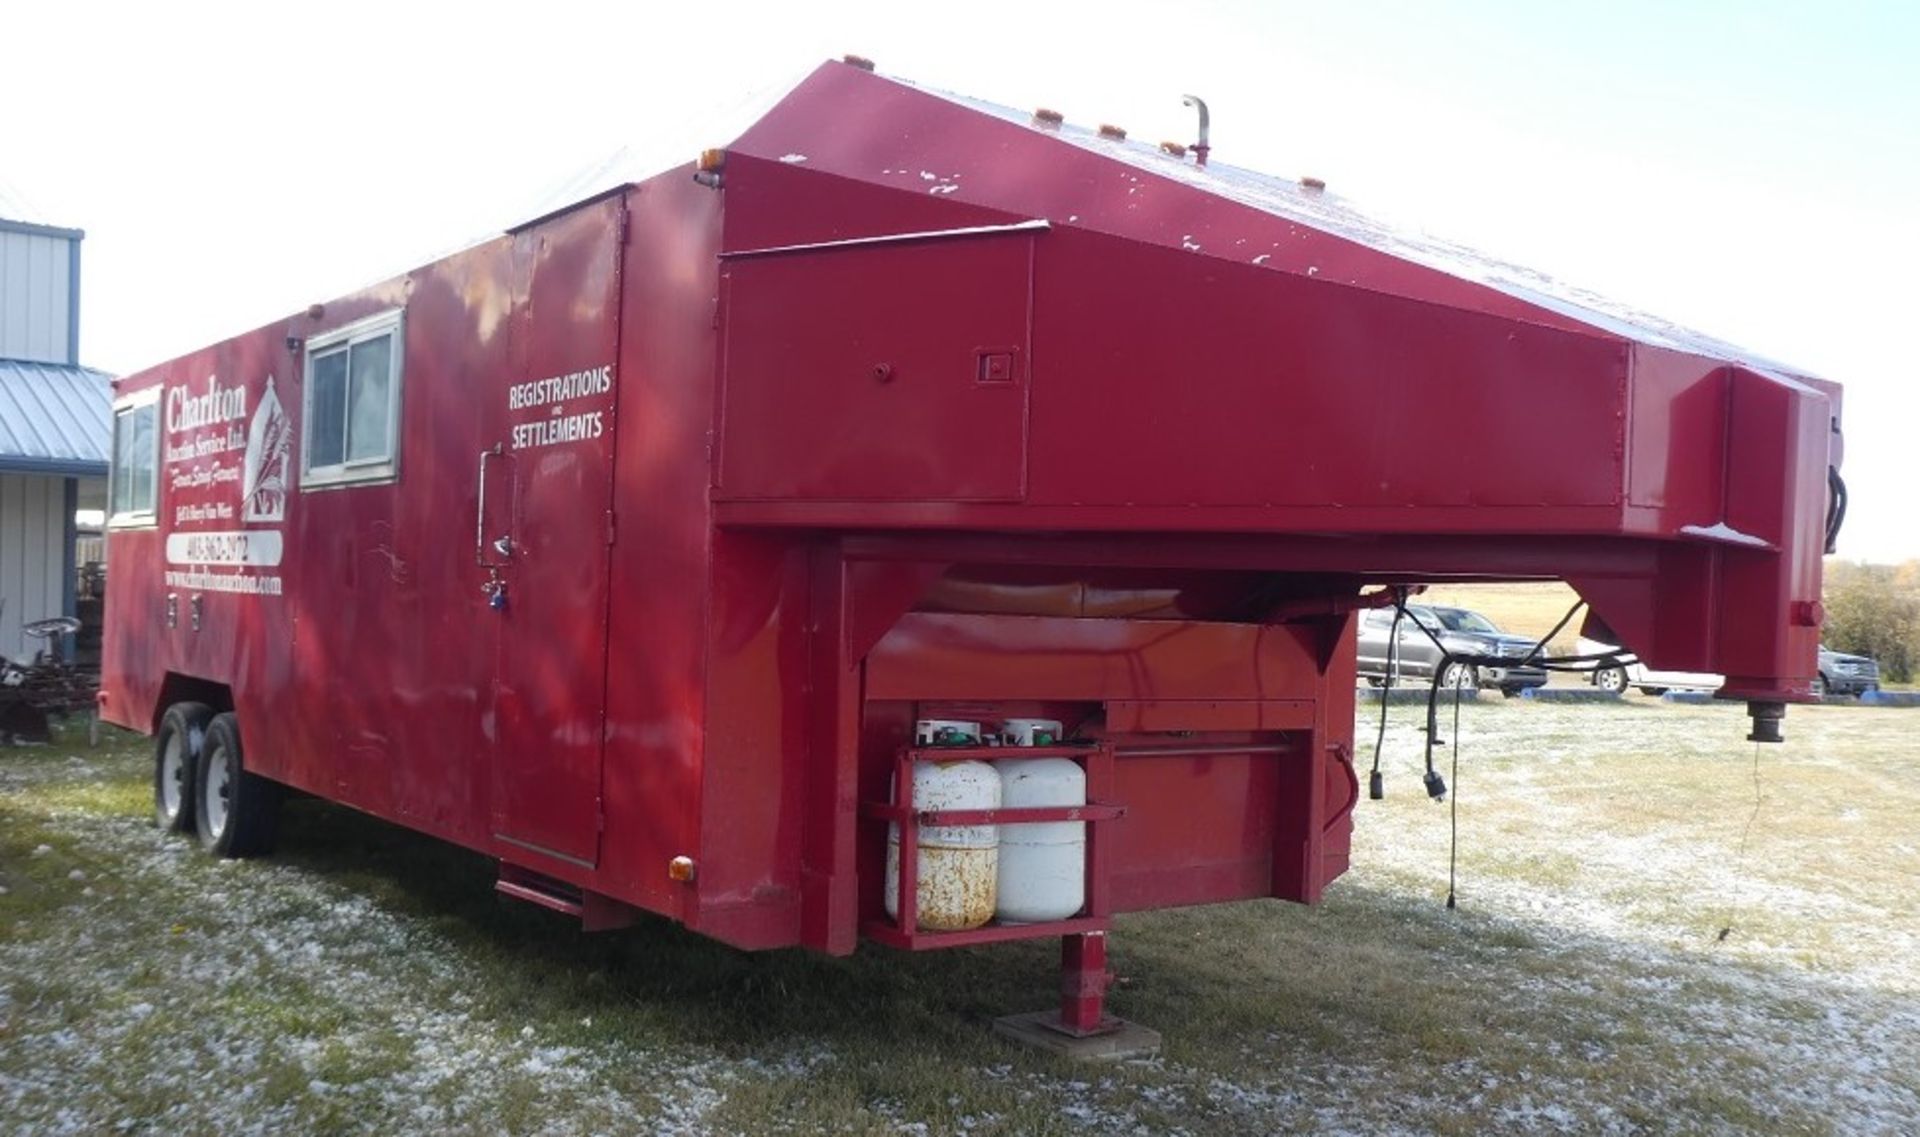 2002 SHOP BUILT 24' T/A 5W AUCTION OFFICE TRAILER W/LIGHTS, HEATER, BATHROOM & AUCTION/BOOTH - Image 2 of 8